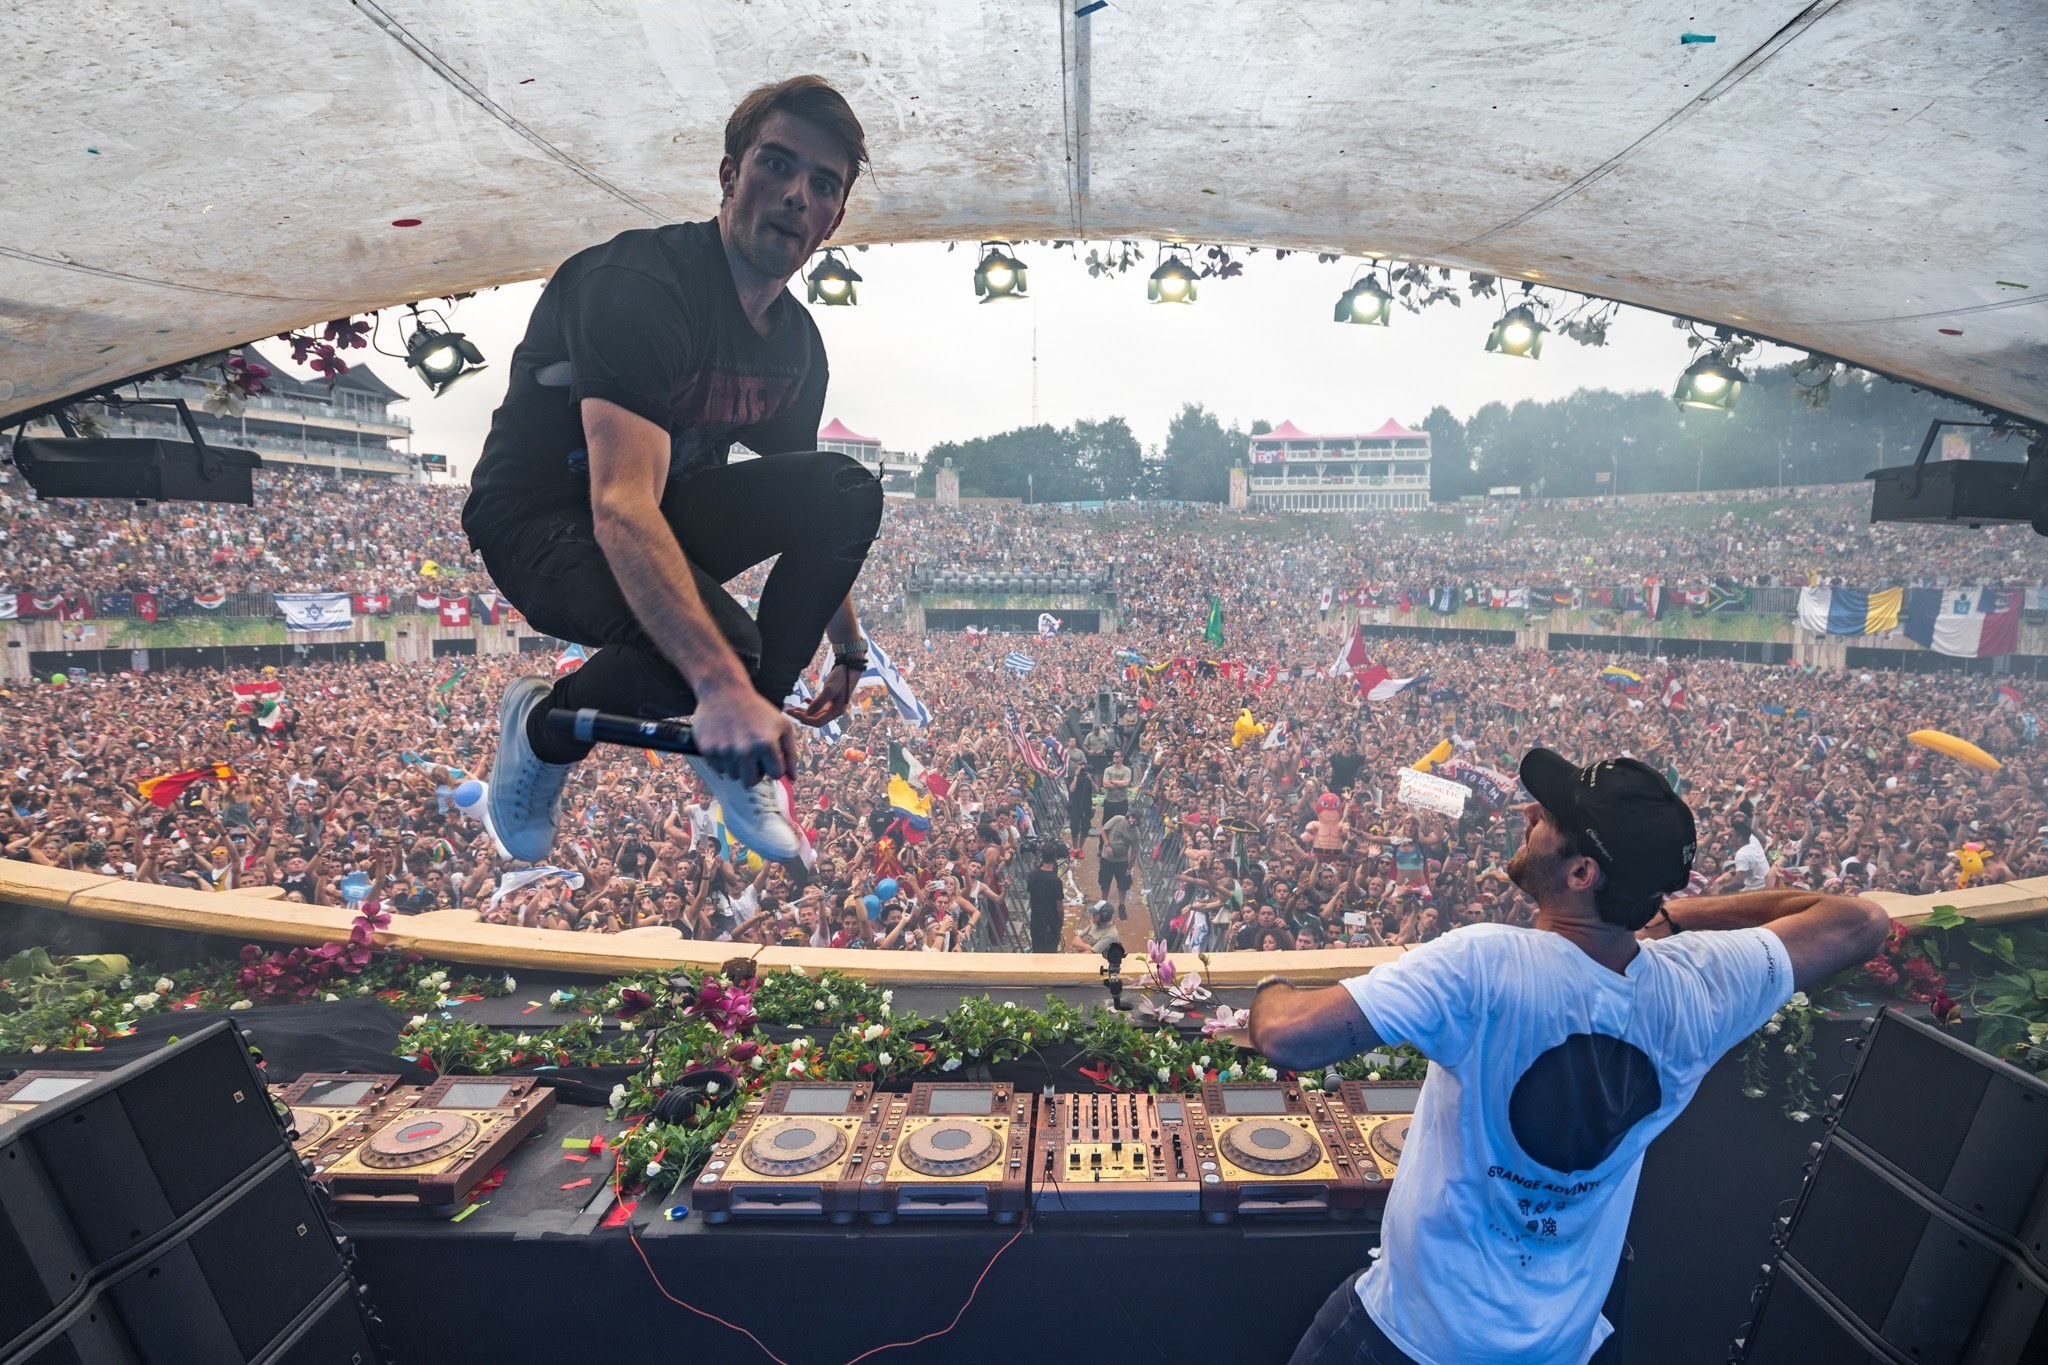 Tomorrowland 2016 Laser Show Hd Wallpapers - Tomorrowland Belgium 2016 The Chainsmokers , HD Wallpaper & Backgrounds